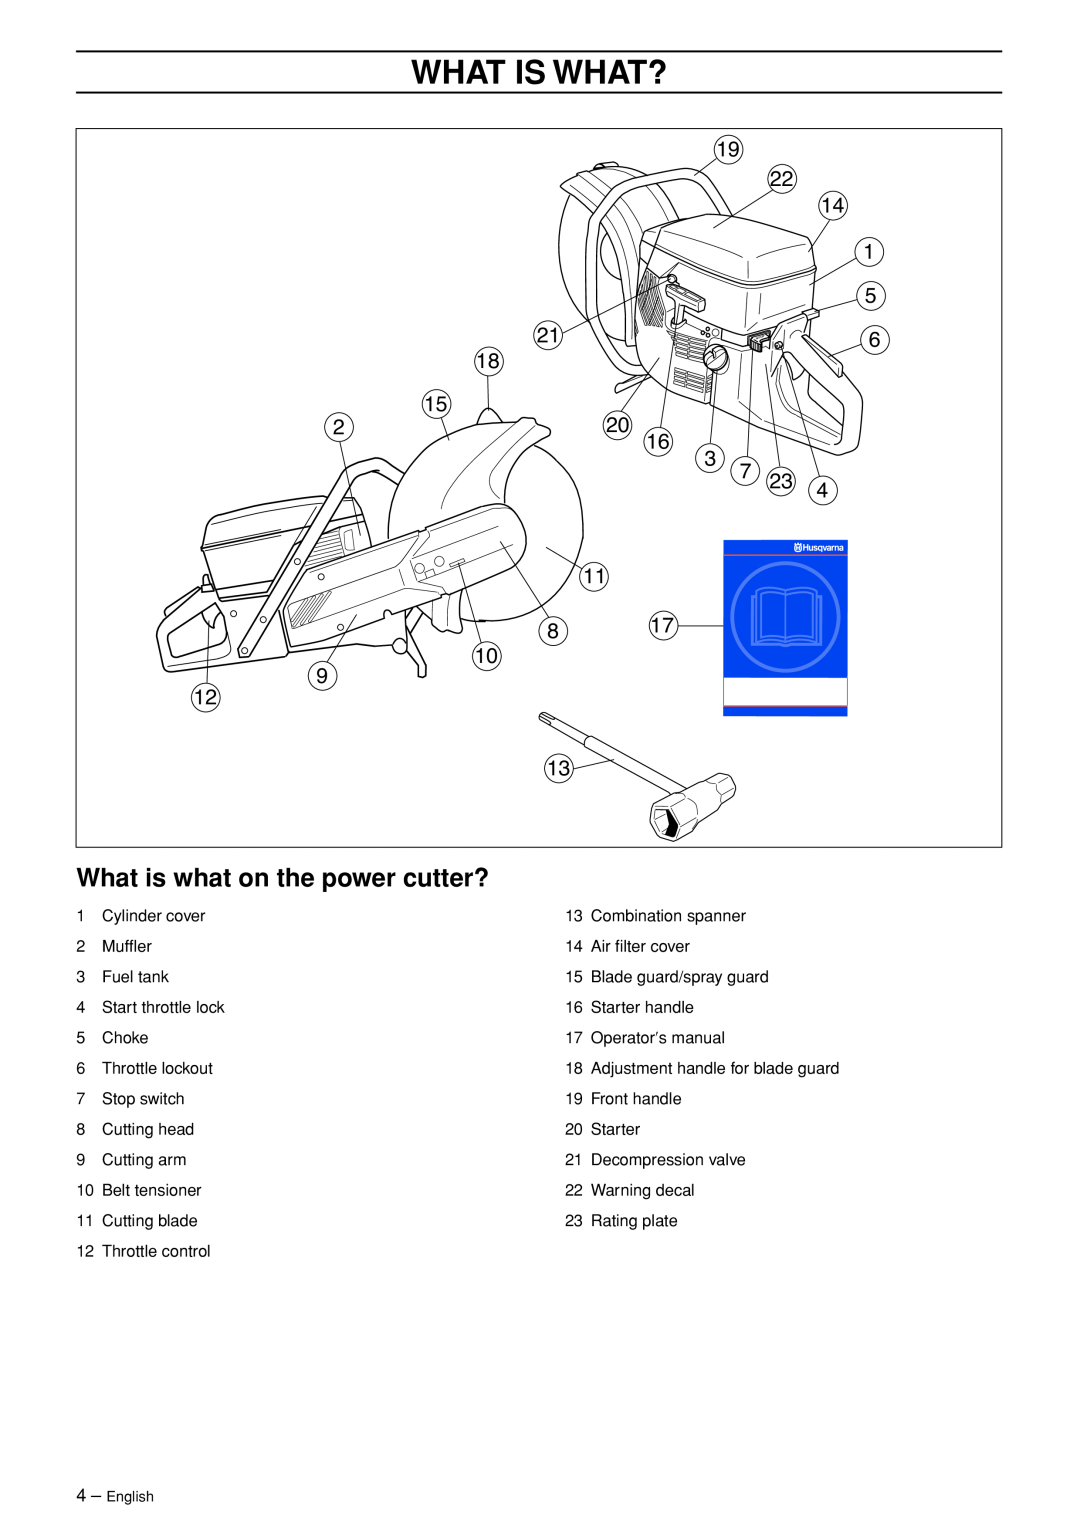 Husqvarna K960 manual What Is What?, What is what on the power cutter? 